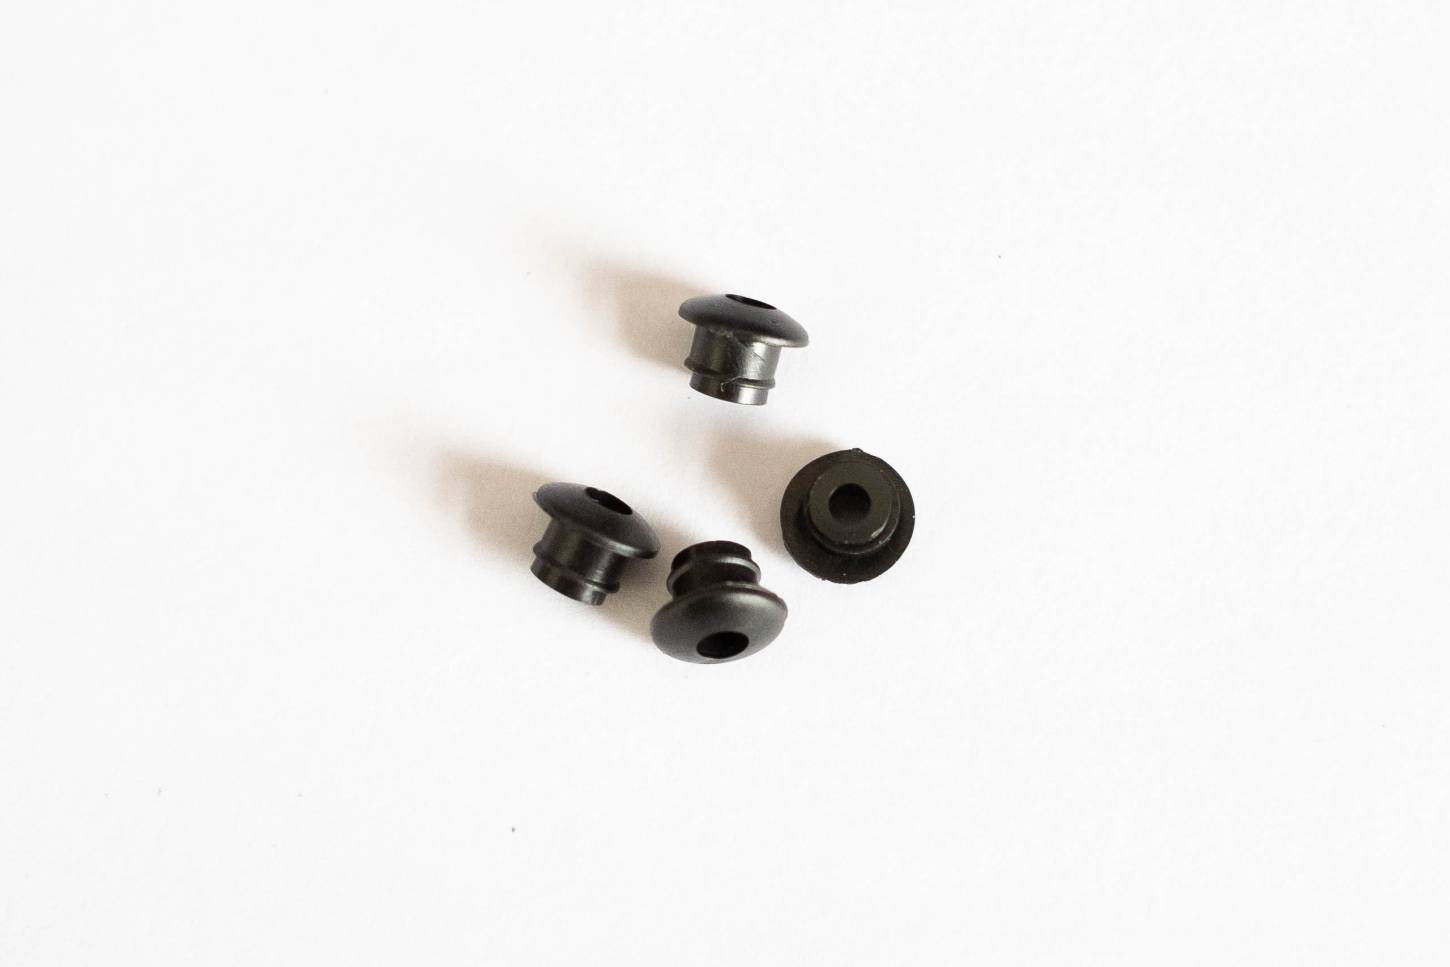 4x frame plugs protective nipple for light cable - internal routing